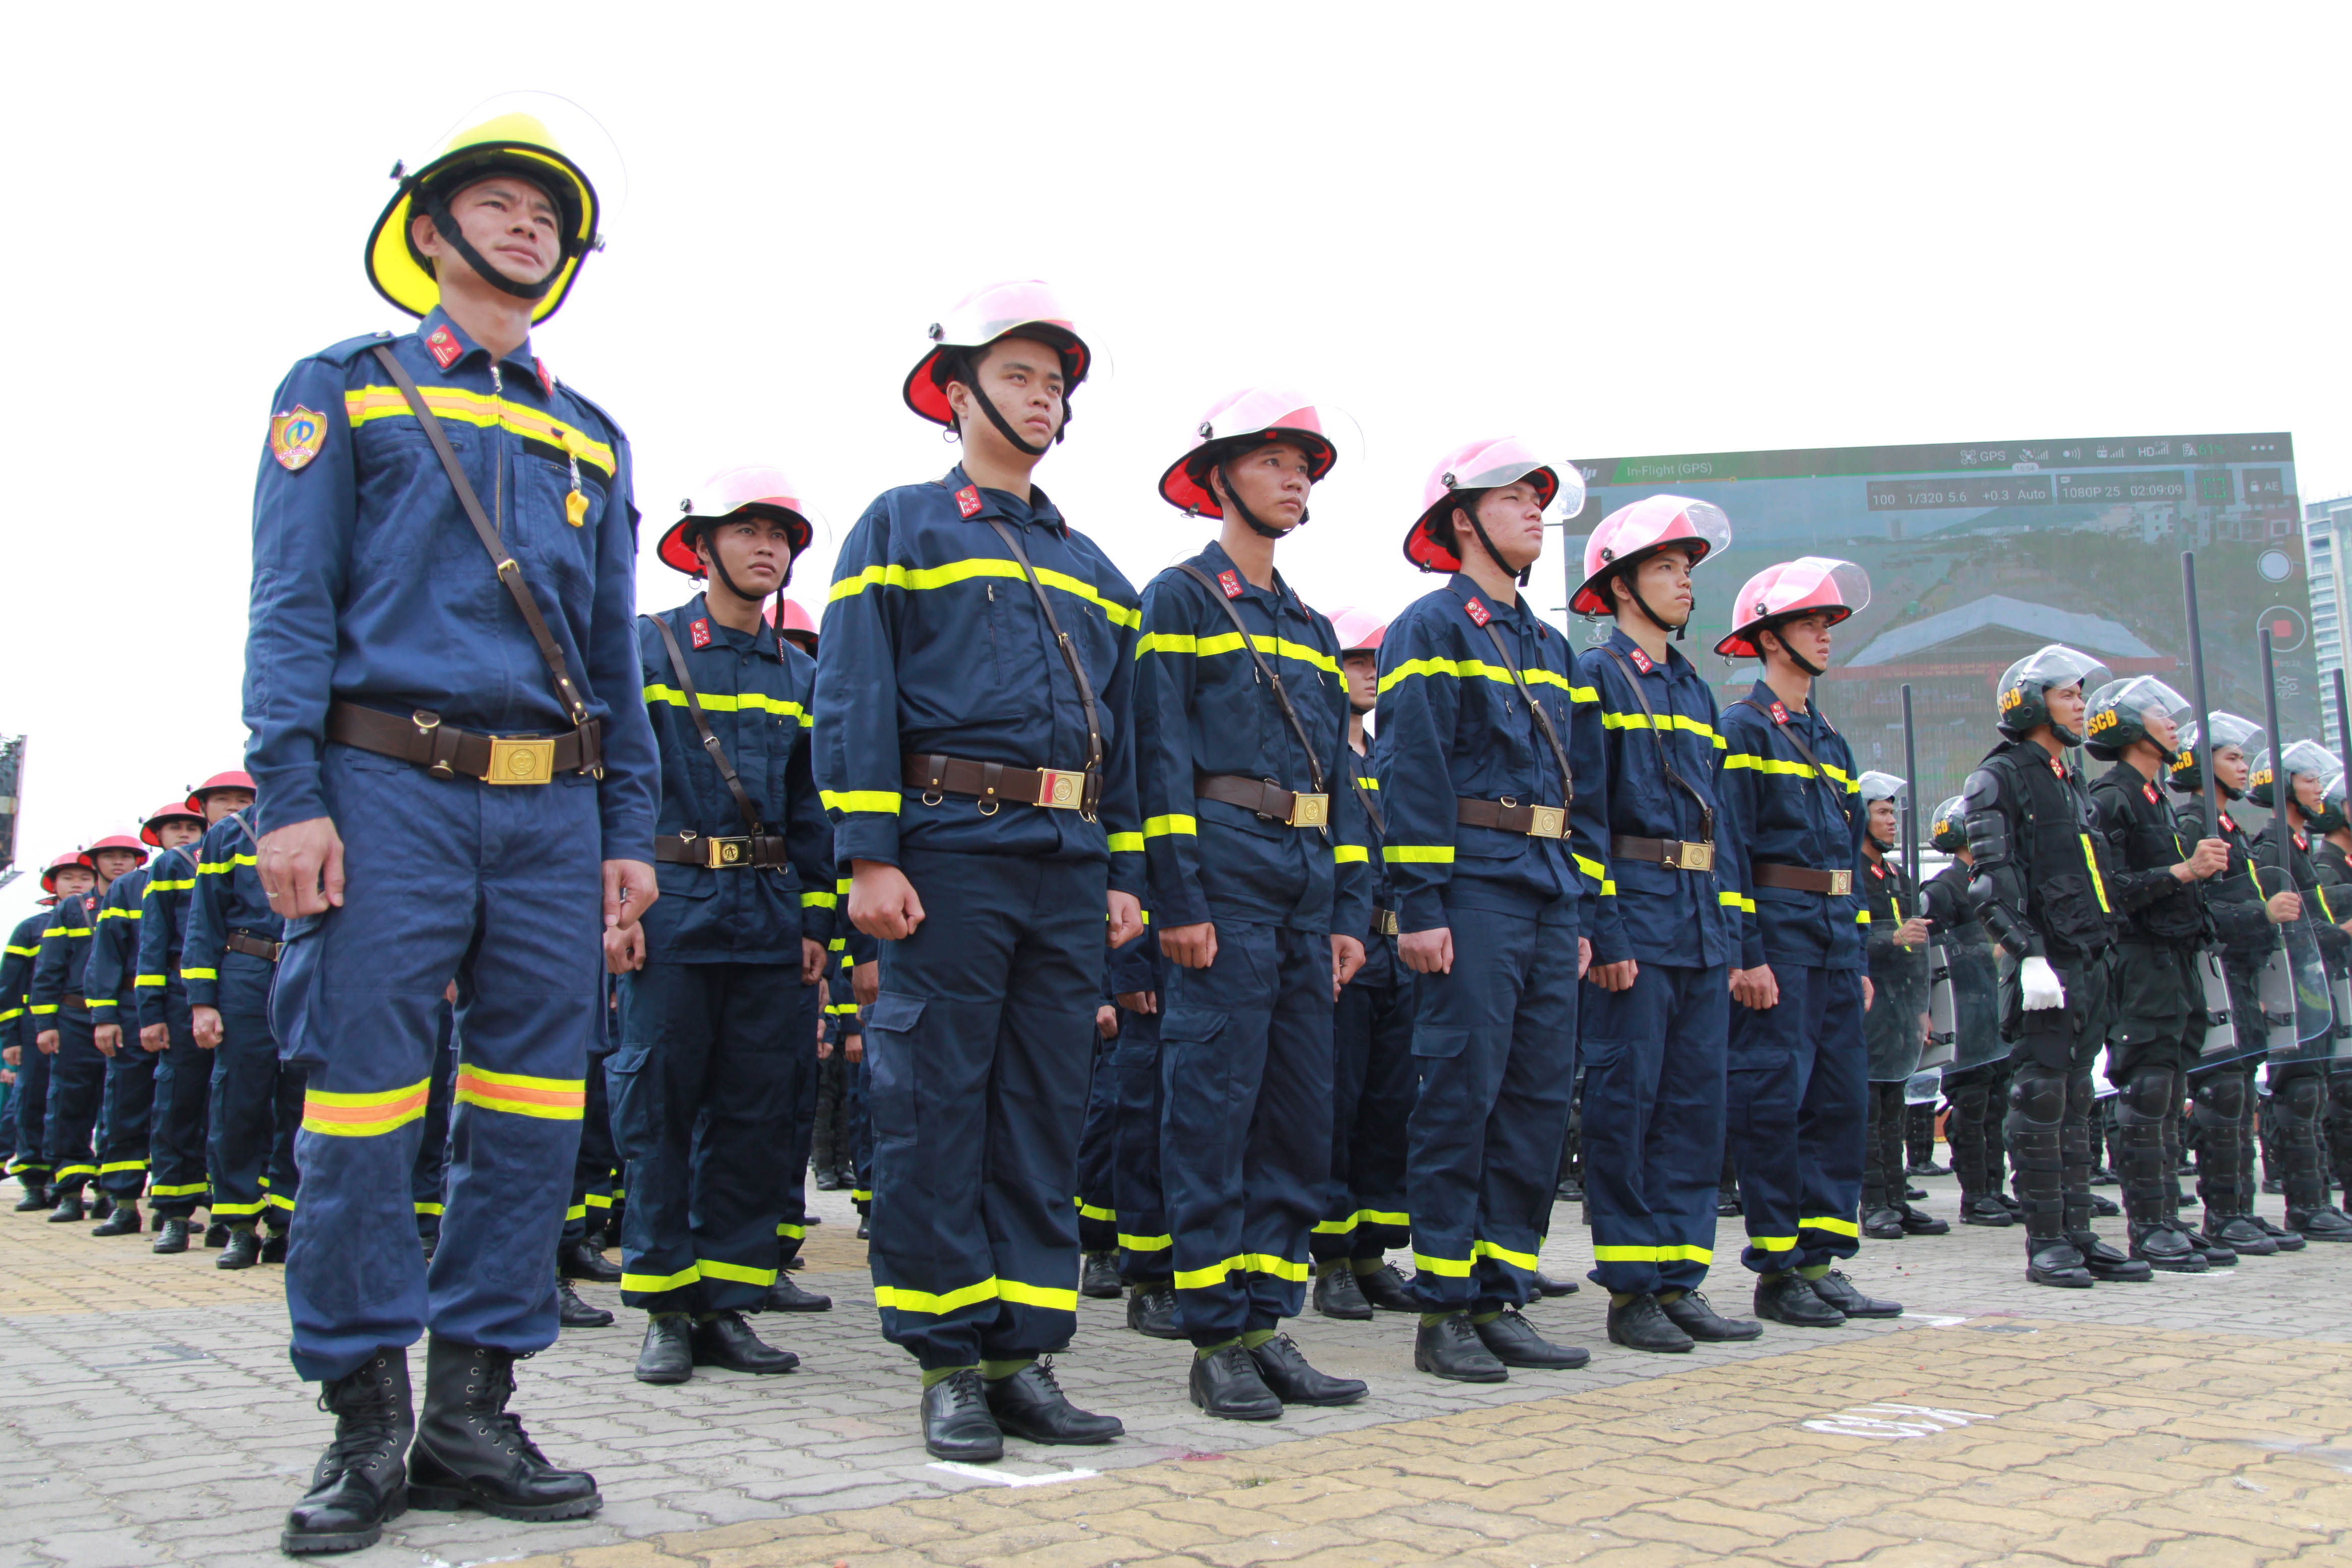 Firefighting police units